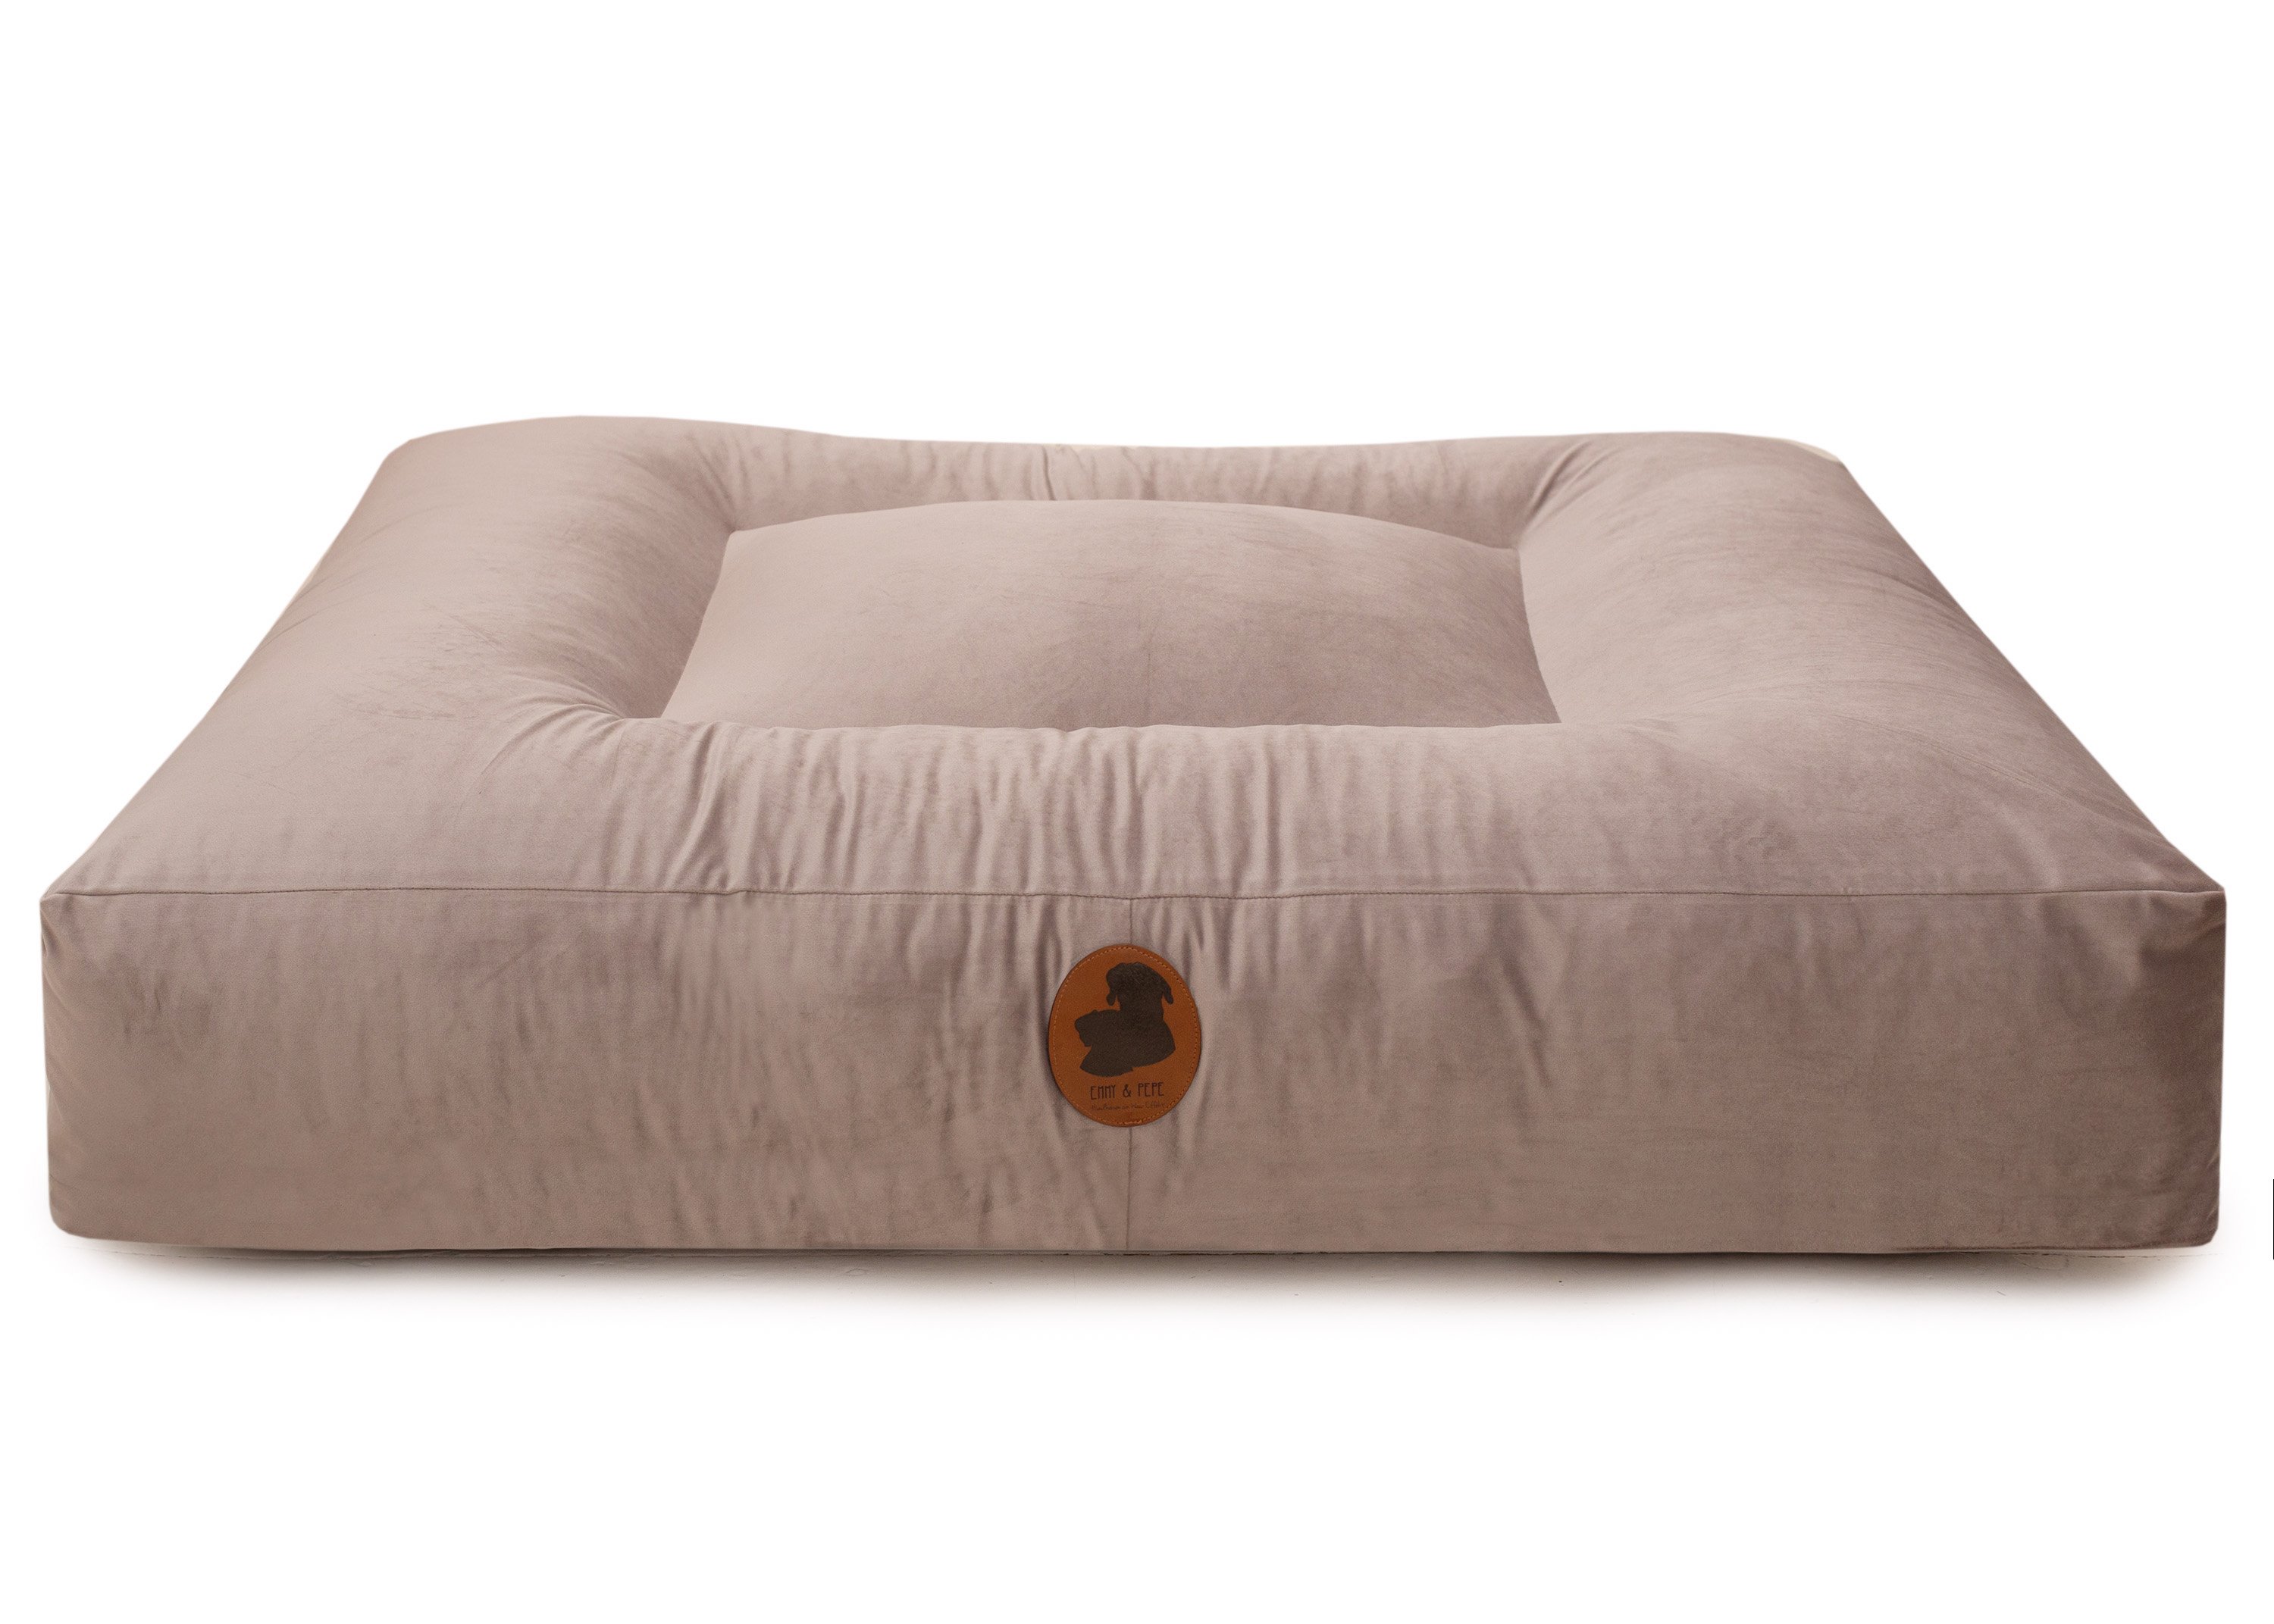 Wau-Bed Rivera Taupe Oval S (80x60cm)